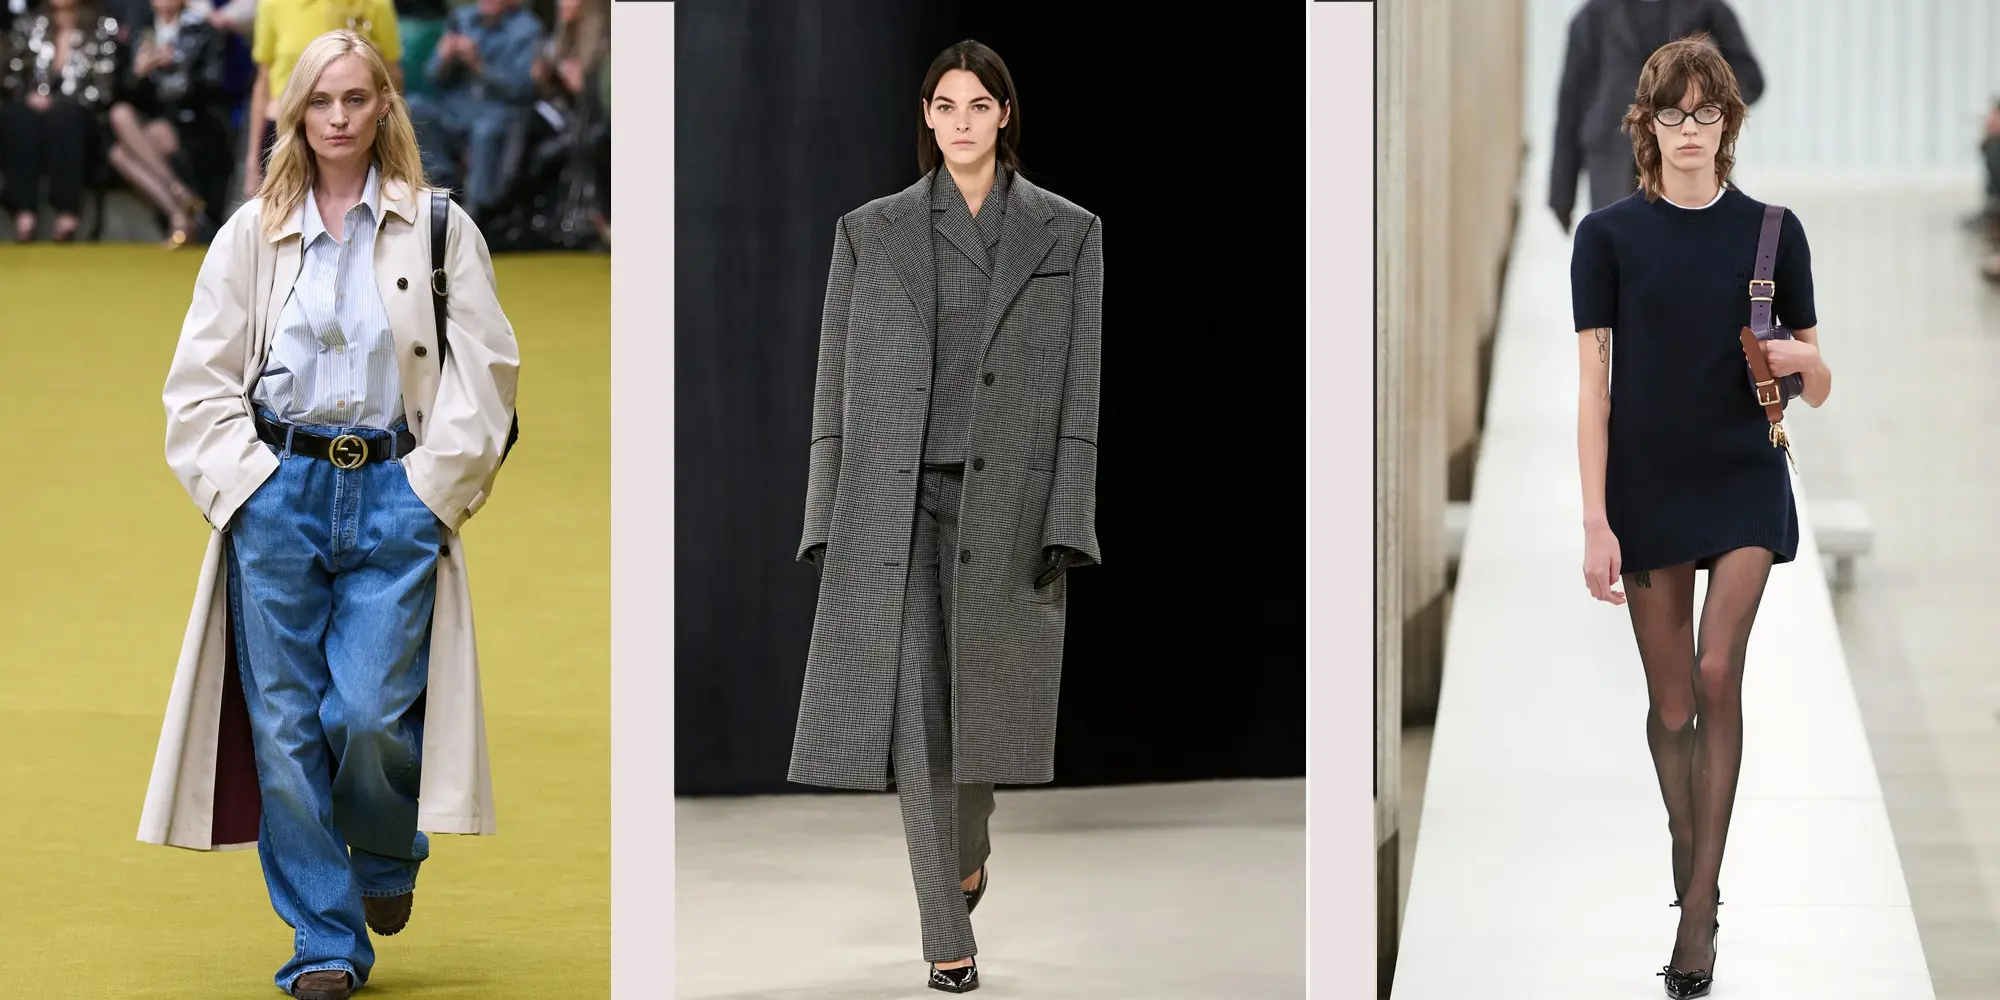 Top Men's Fashion Trends For Fall/Winter 2020 - Portugal Textile